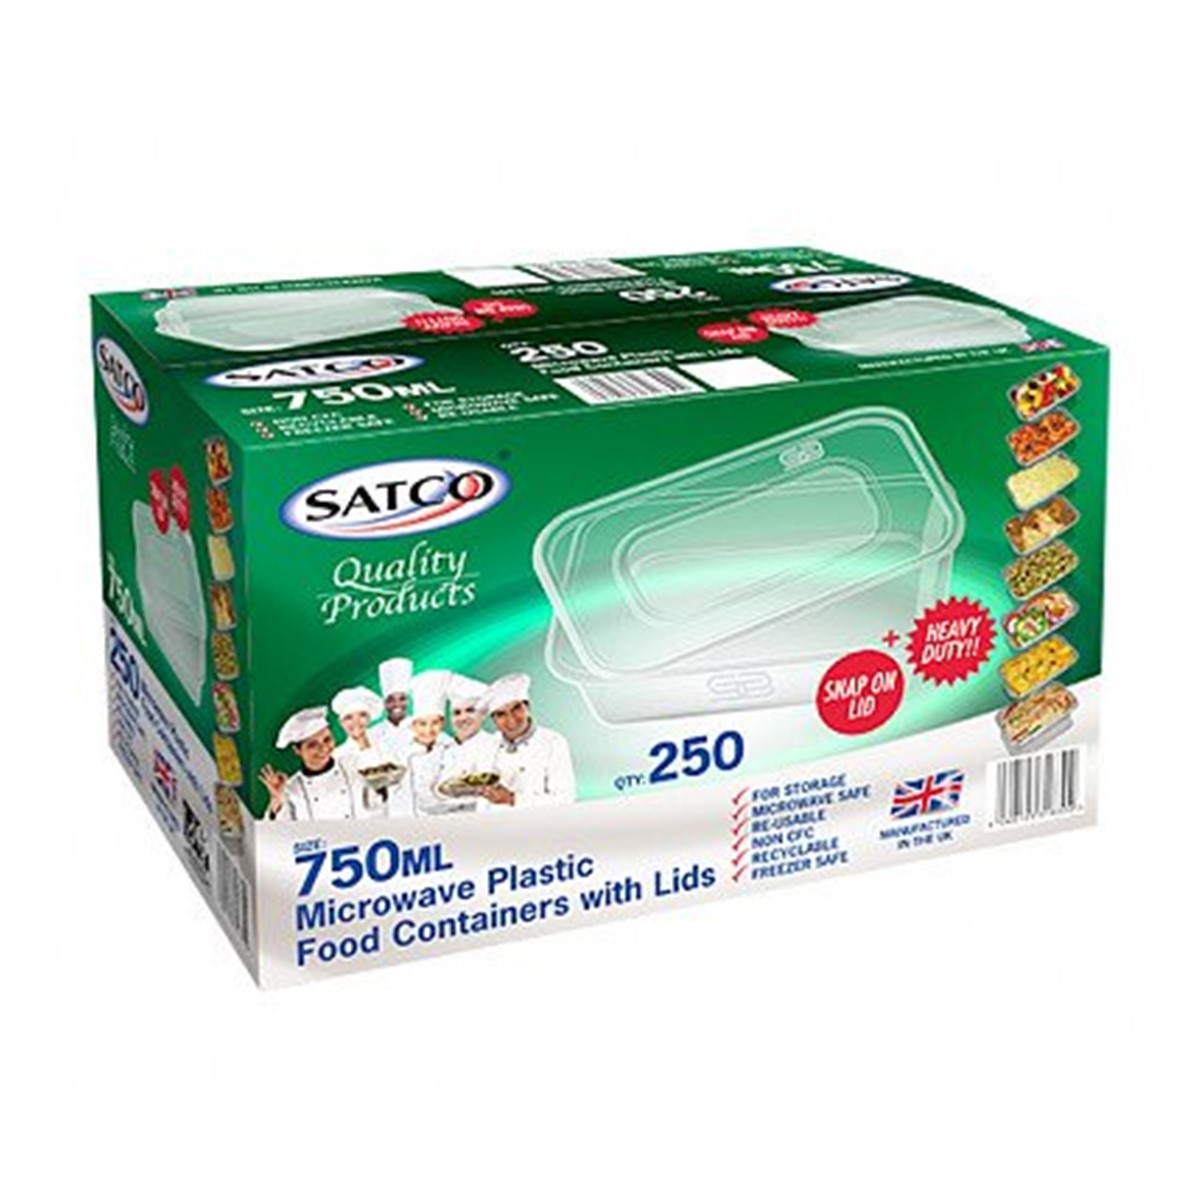 Satco Take-Away Container + Lid 750ml - 250 sets